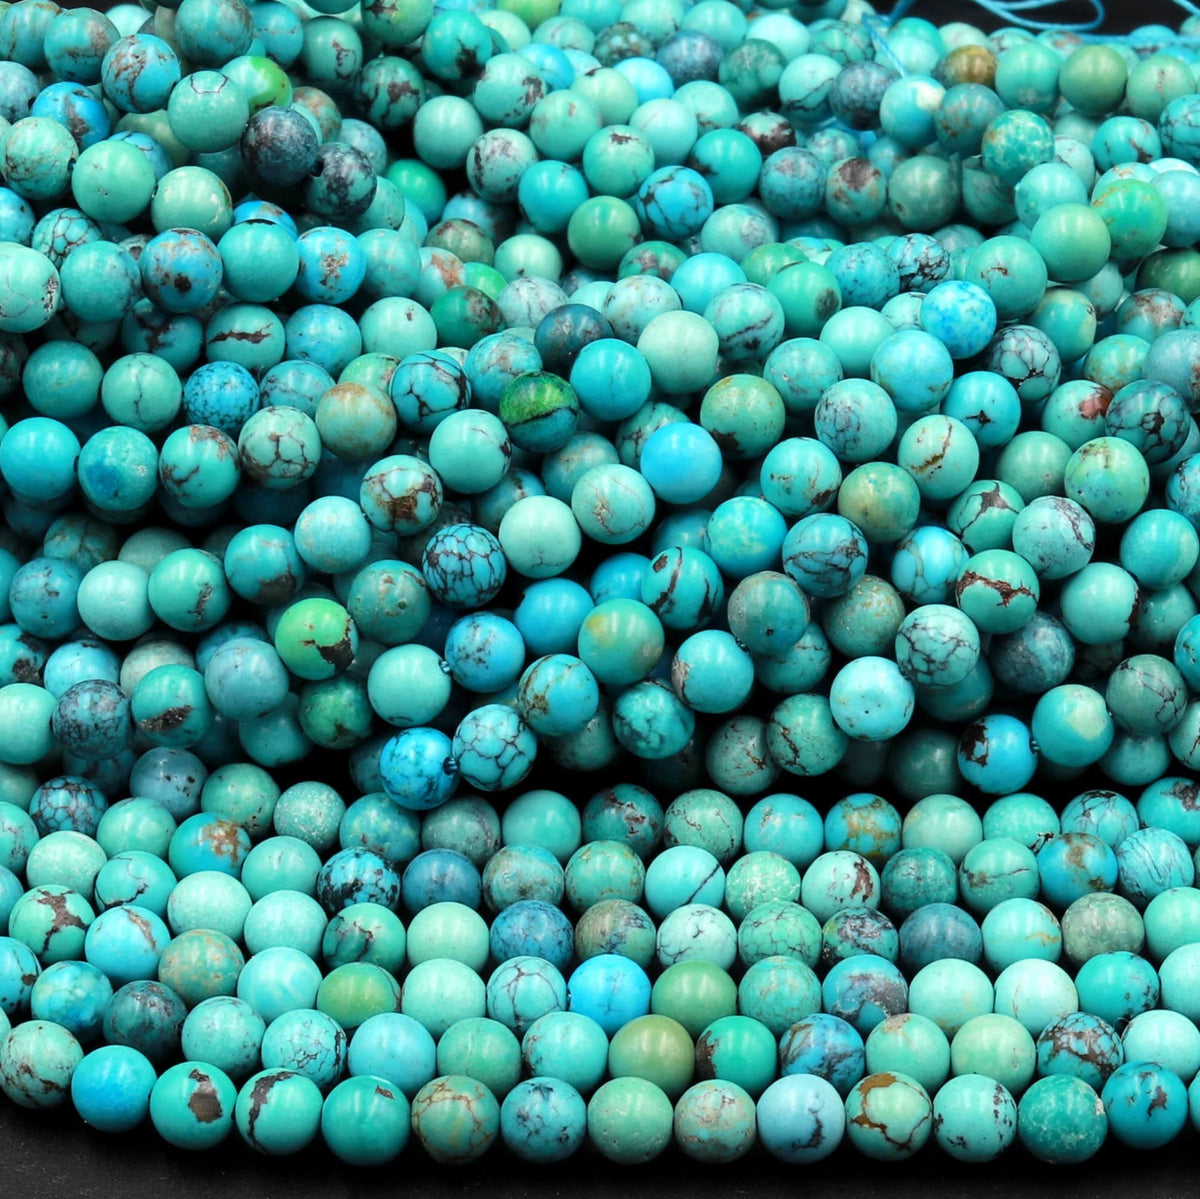 4mm Blue Turquoise Beads Round Gemstone Loose Beads for Jewelry Making (90-95pcs/strand)